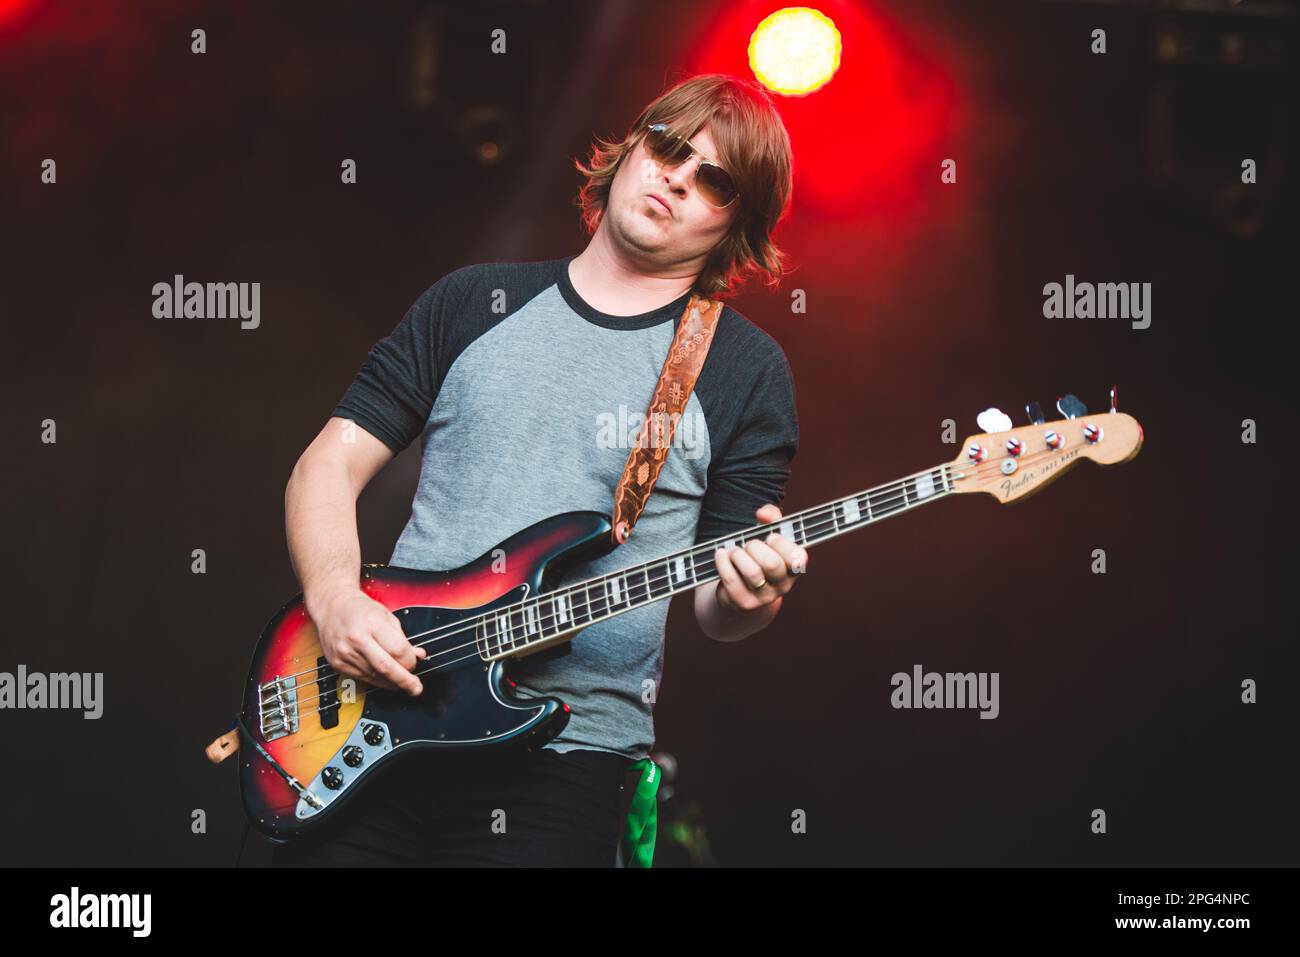 TODAYS Festival, TURIN, ITALY: Ryan Van Kriedt, of the American psychedelic rock band called “The The Brian Jonestown Massacre” (BJM) performing live on stage at the Todays Festival held in Torino. Stock Photo